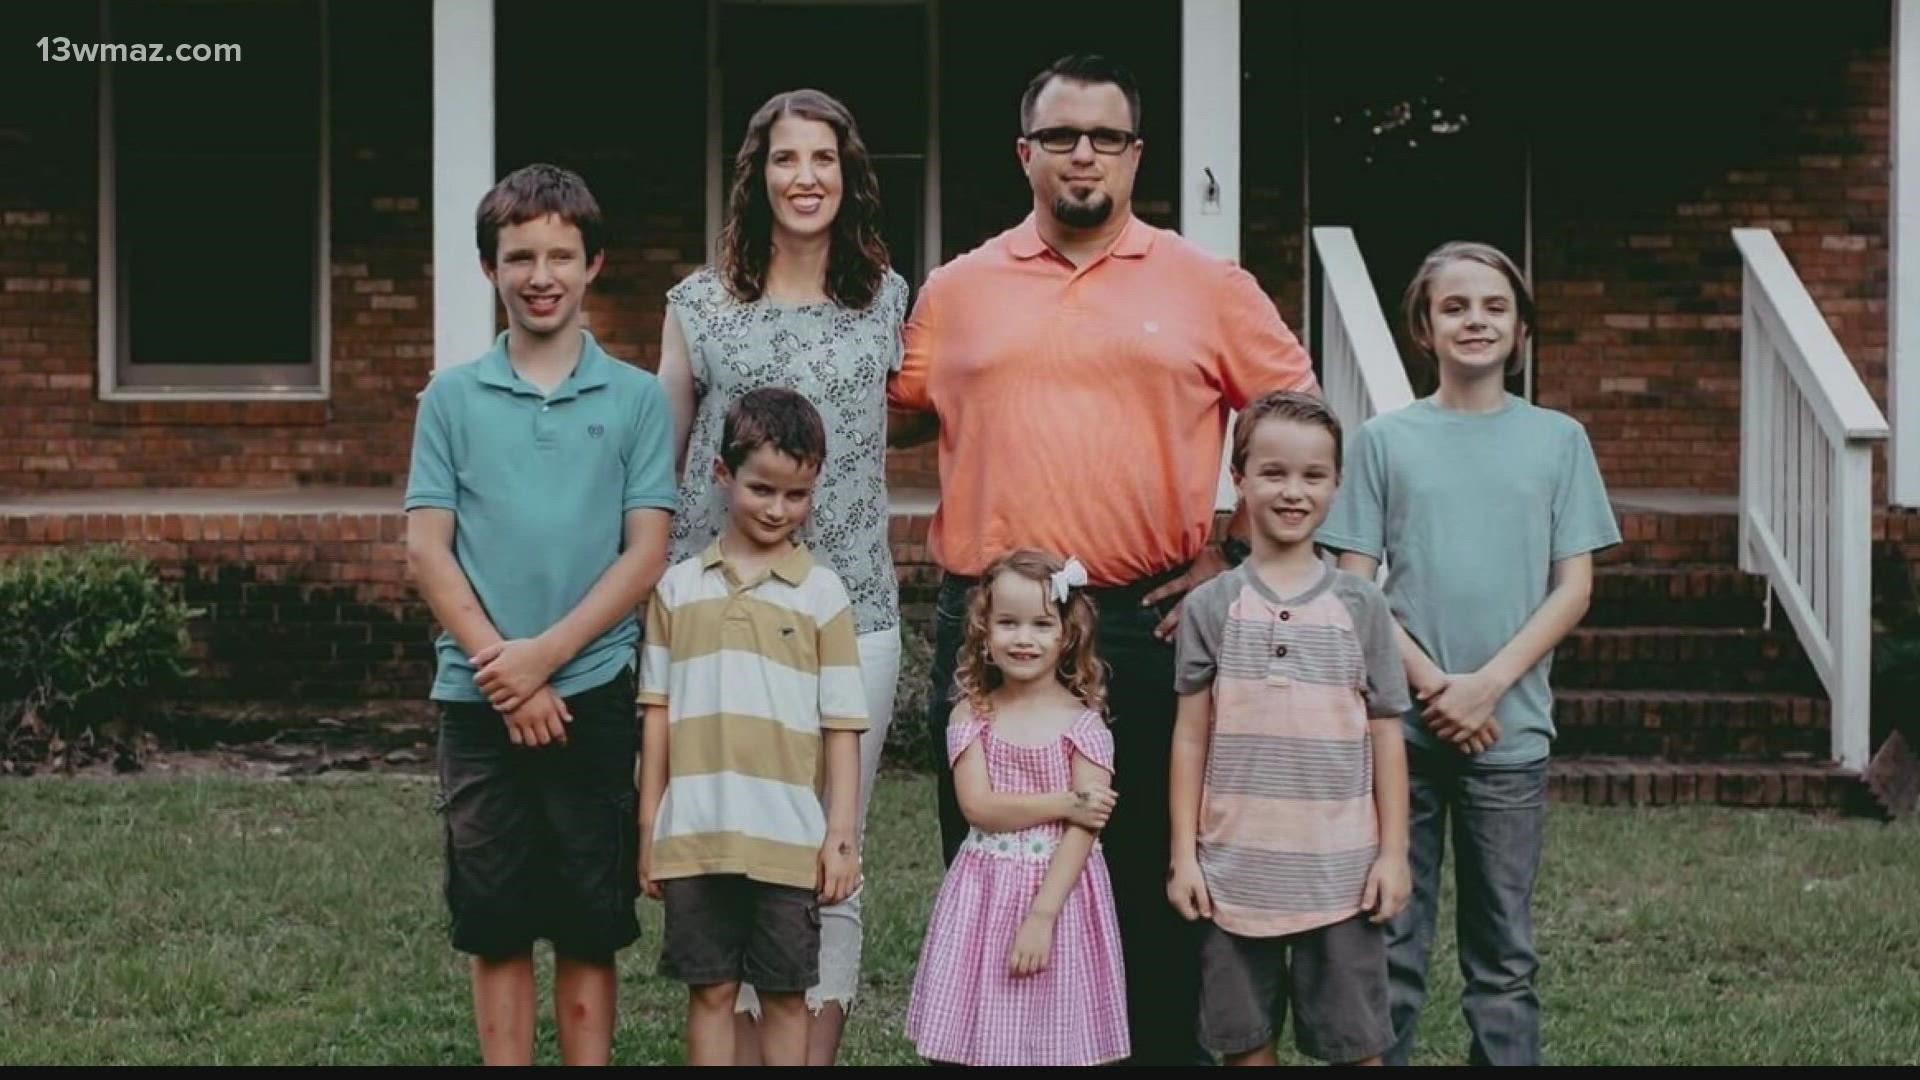 After unsuccessfully trying fertility treatments, Kimberly and Jason adopted two brothers. When they looked into adopting more, they found out they were pregnant...